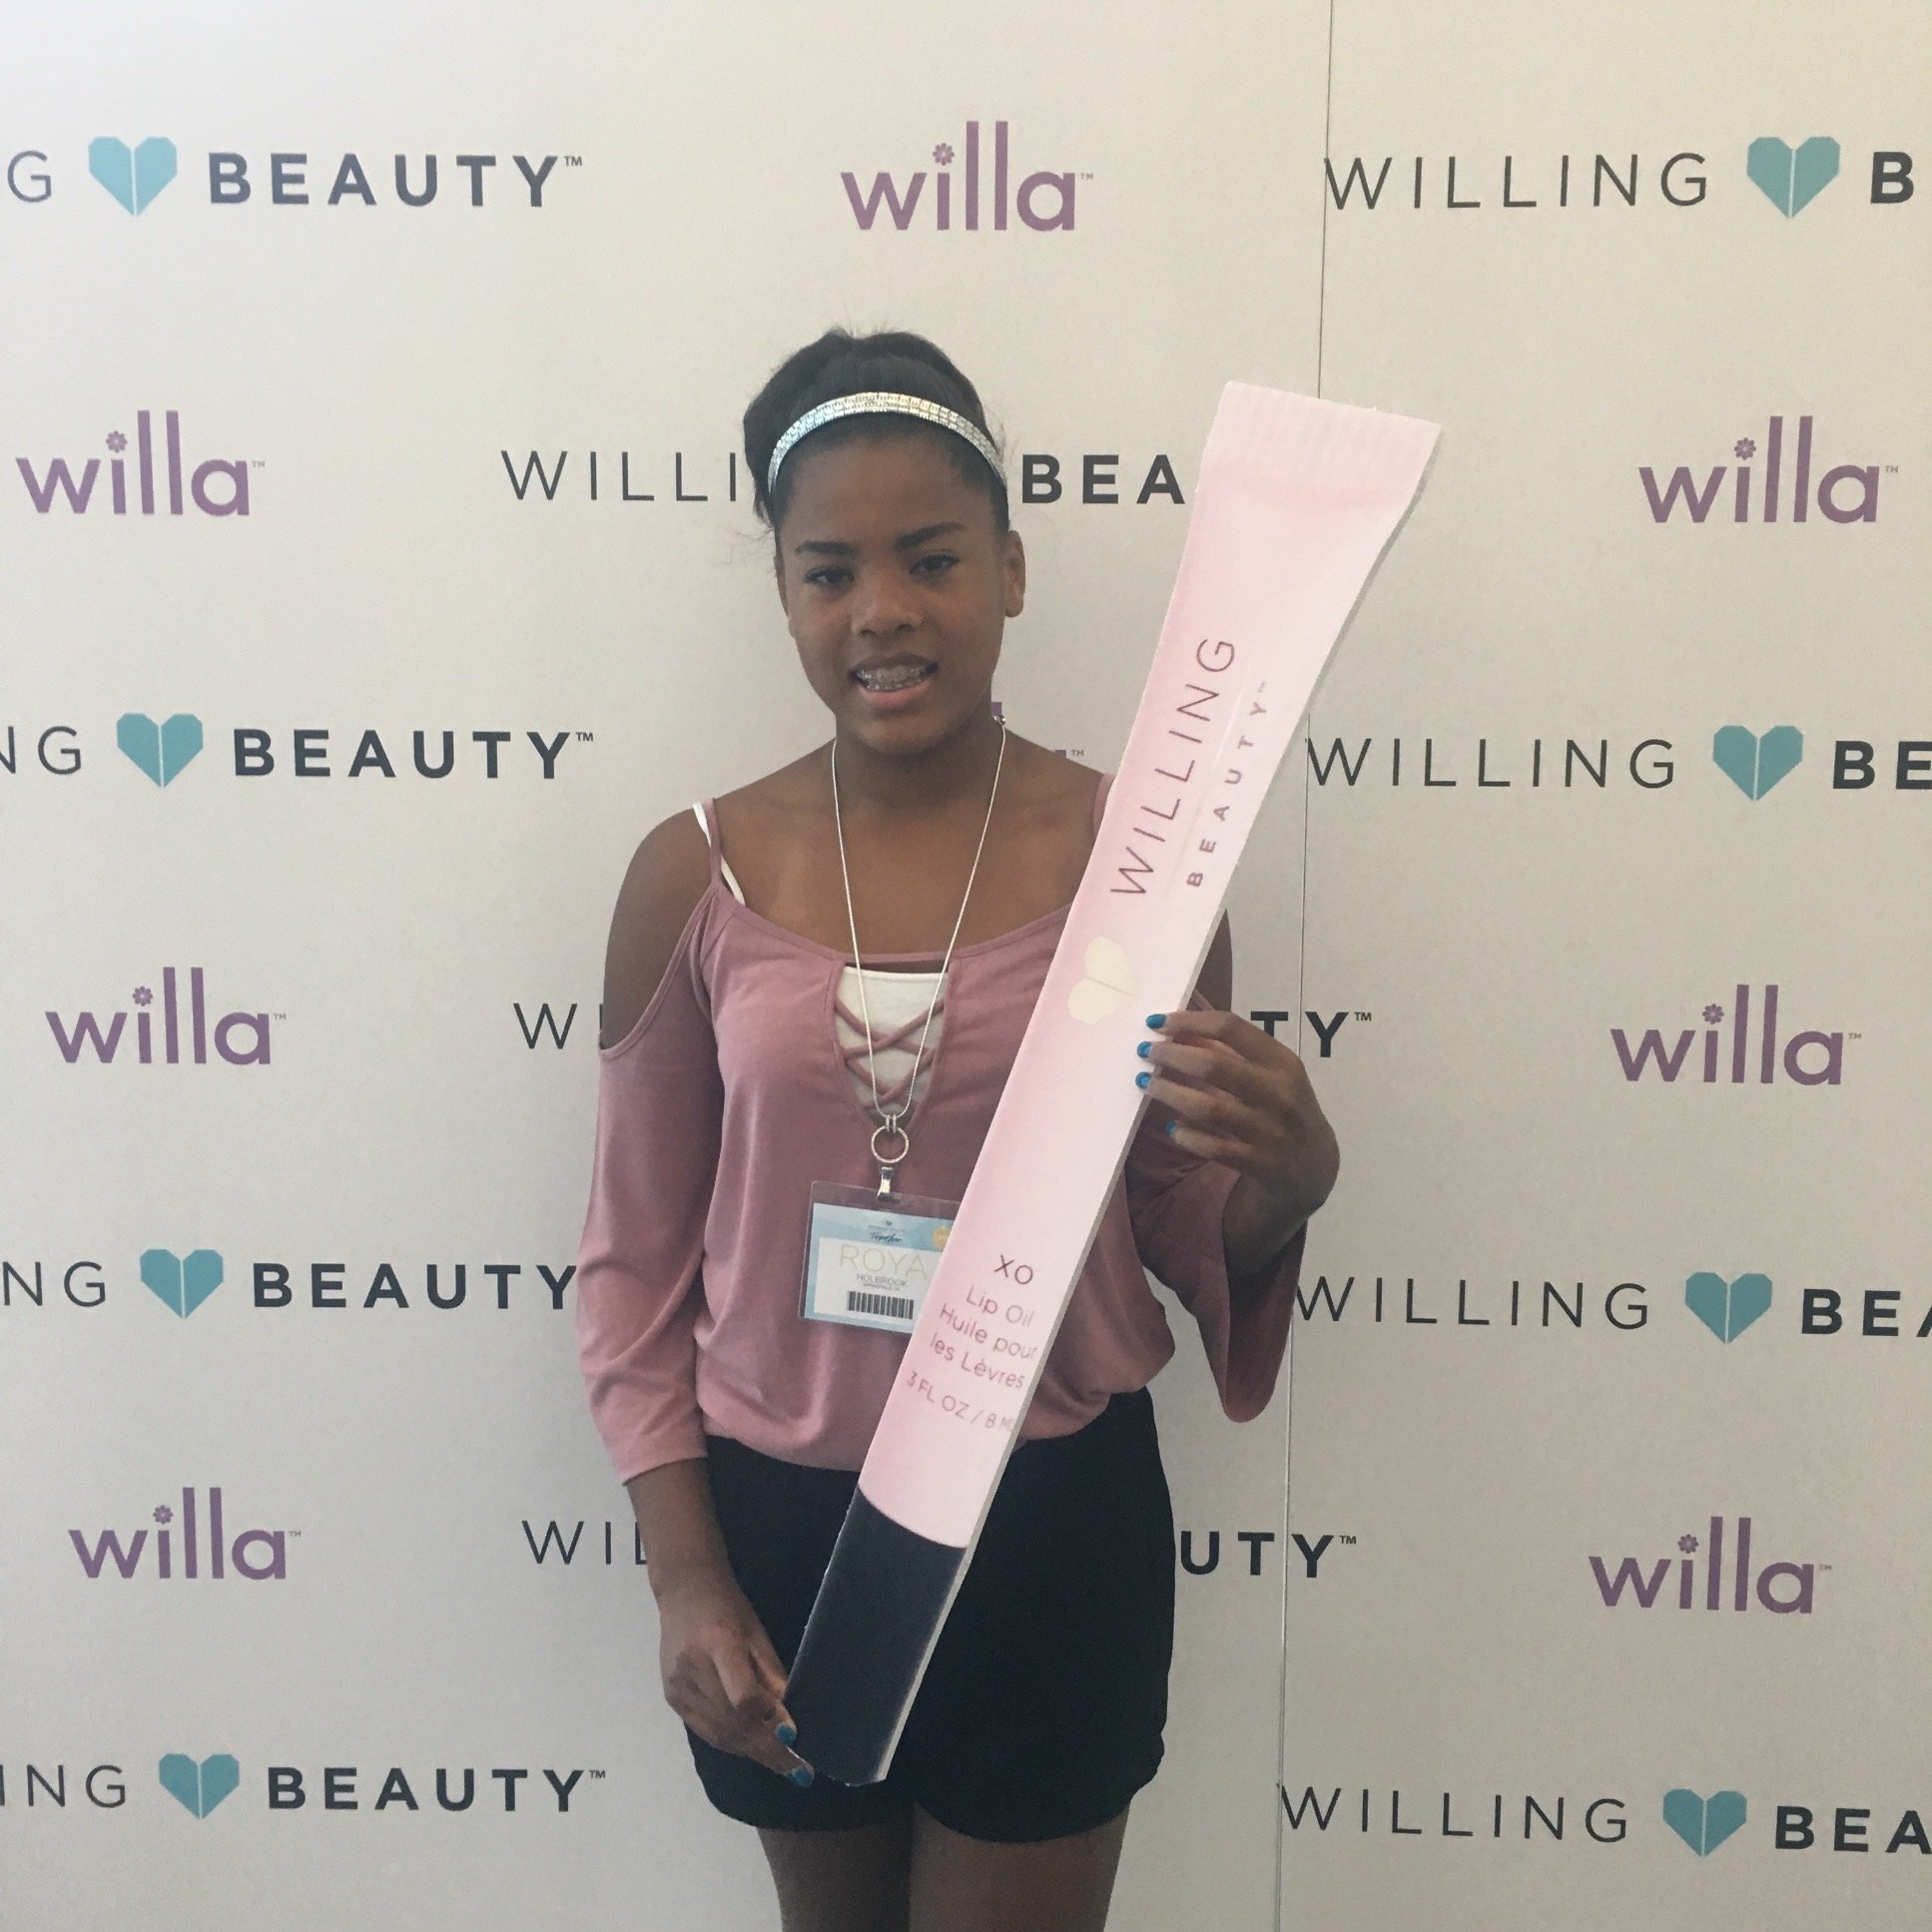 I'm a 14yo Willing Beauty skincare consultant. Focused on trying to reach the potential God has in store for me! FB: https://t.co/5pZBsnlkO5